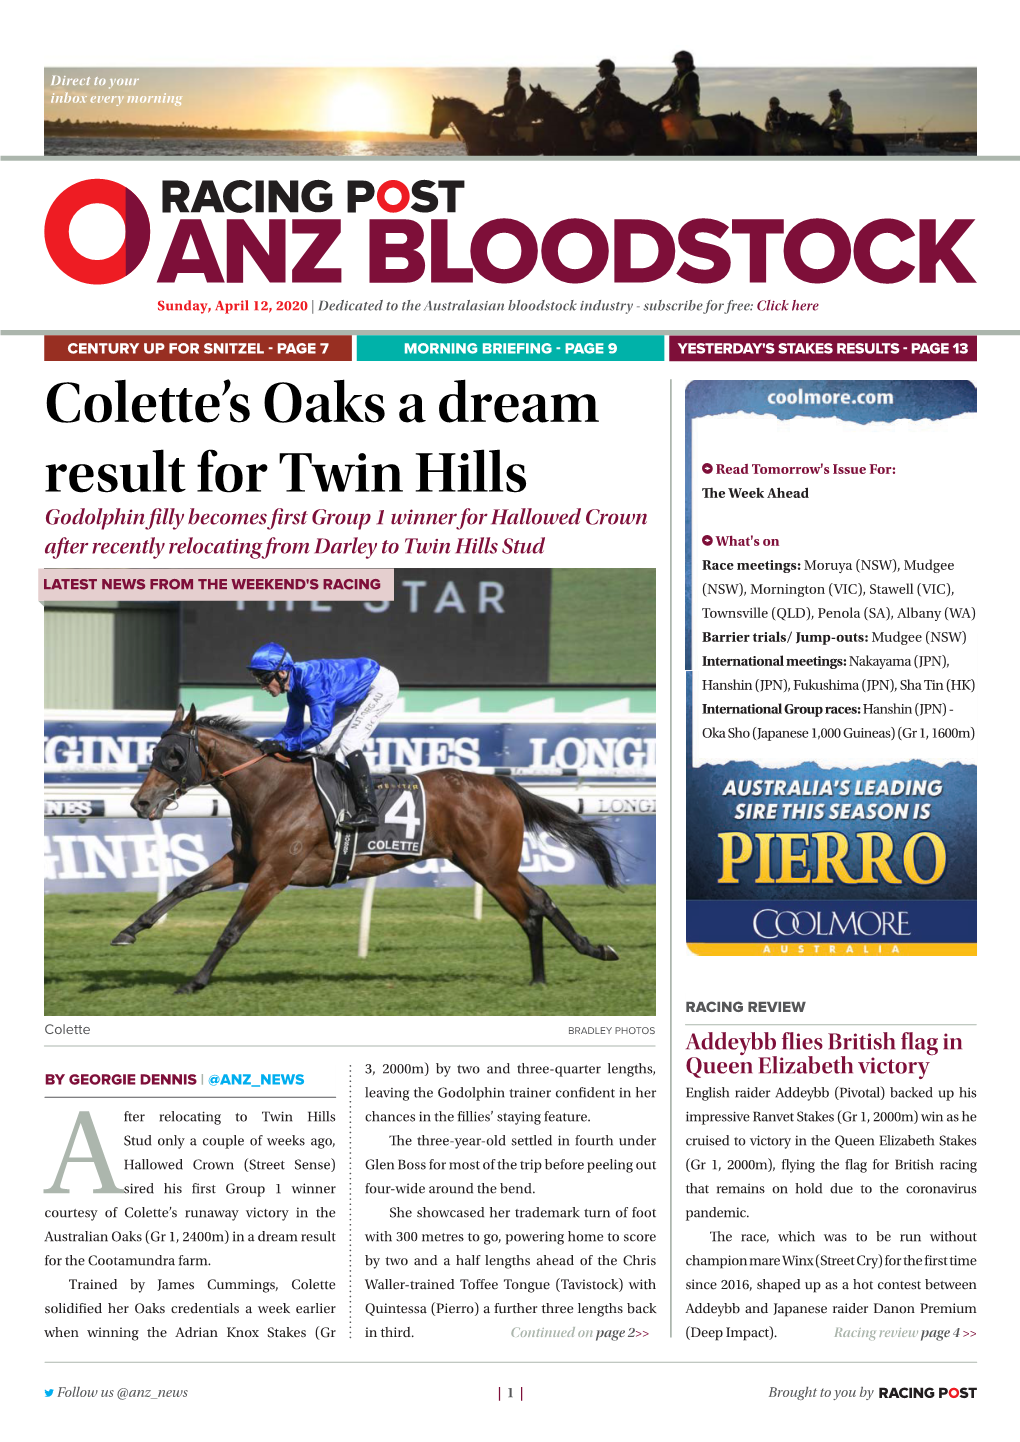 Colette's Oaks a Dream Result for Twin Hills